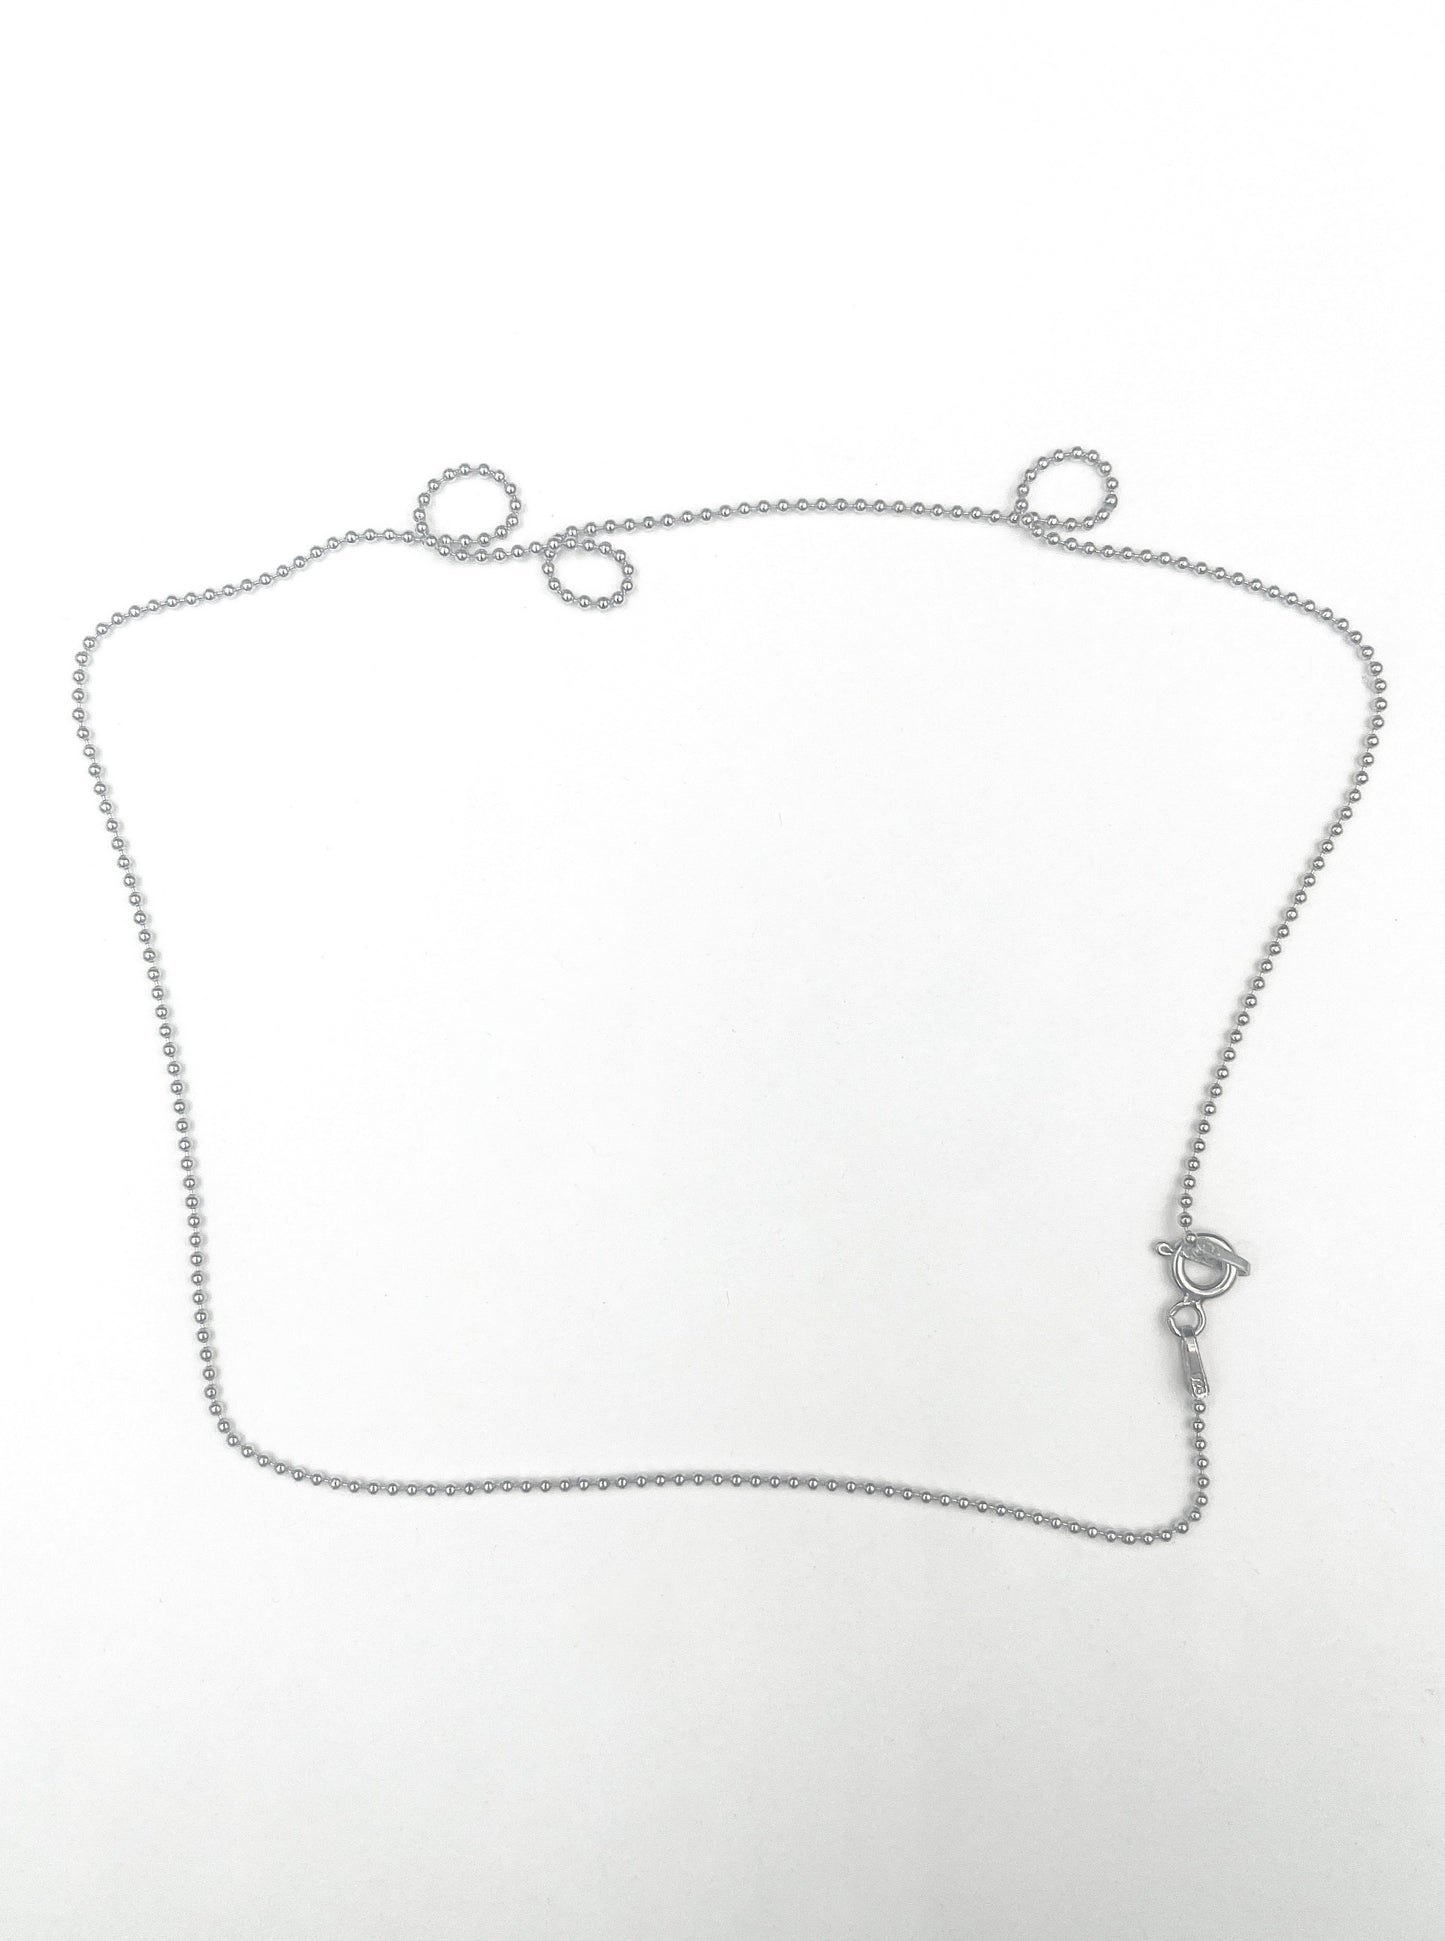 STERLING SILVER ROUND BEAD CHAIN 1.5MM